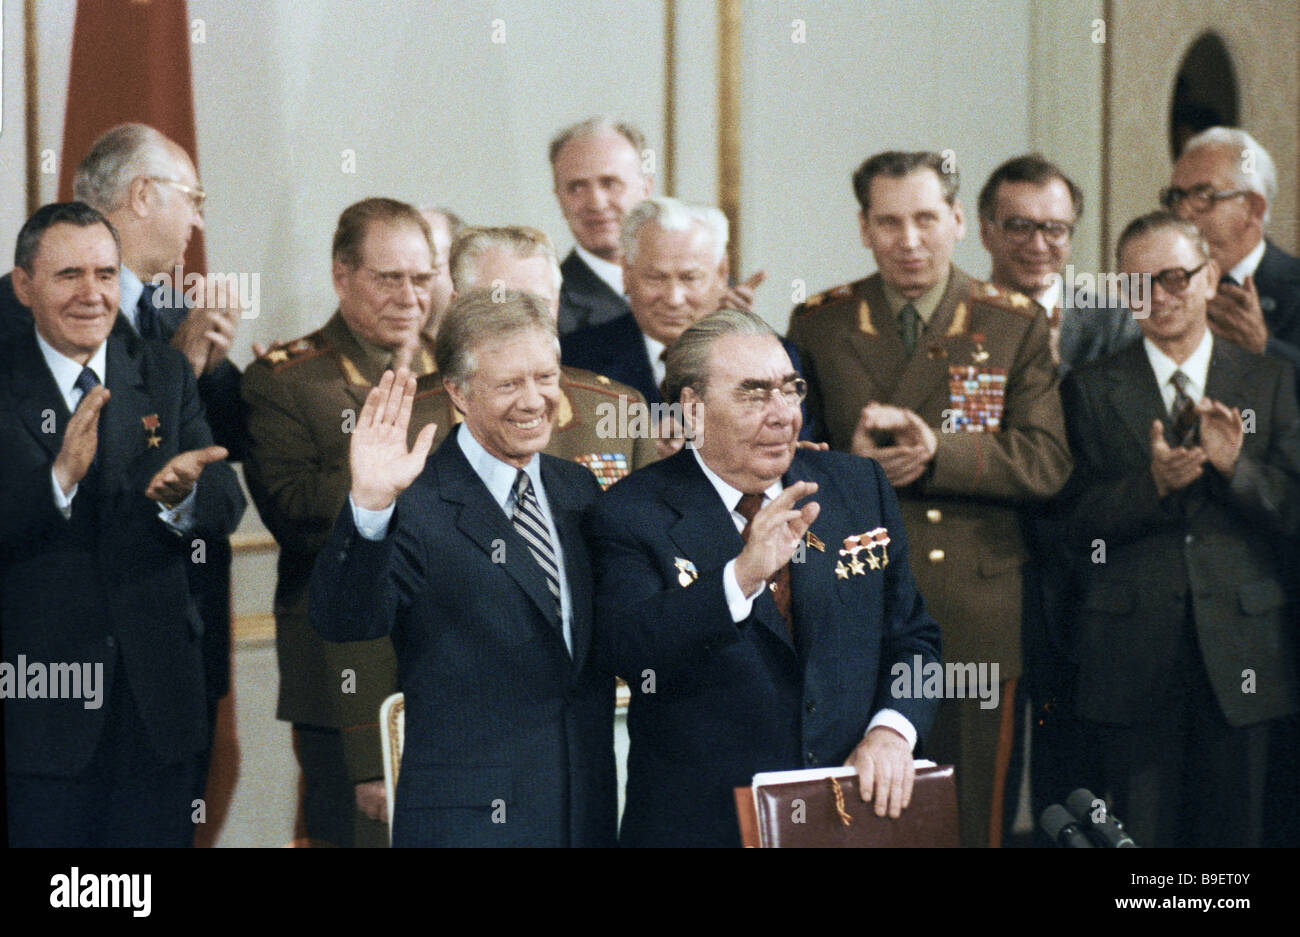 U S S R Communist Party General Secretary Leonid Brezhnev right in the foreground and U S President Jimmy Carter before signing Stock Photo - Alamy